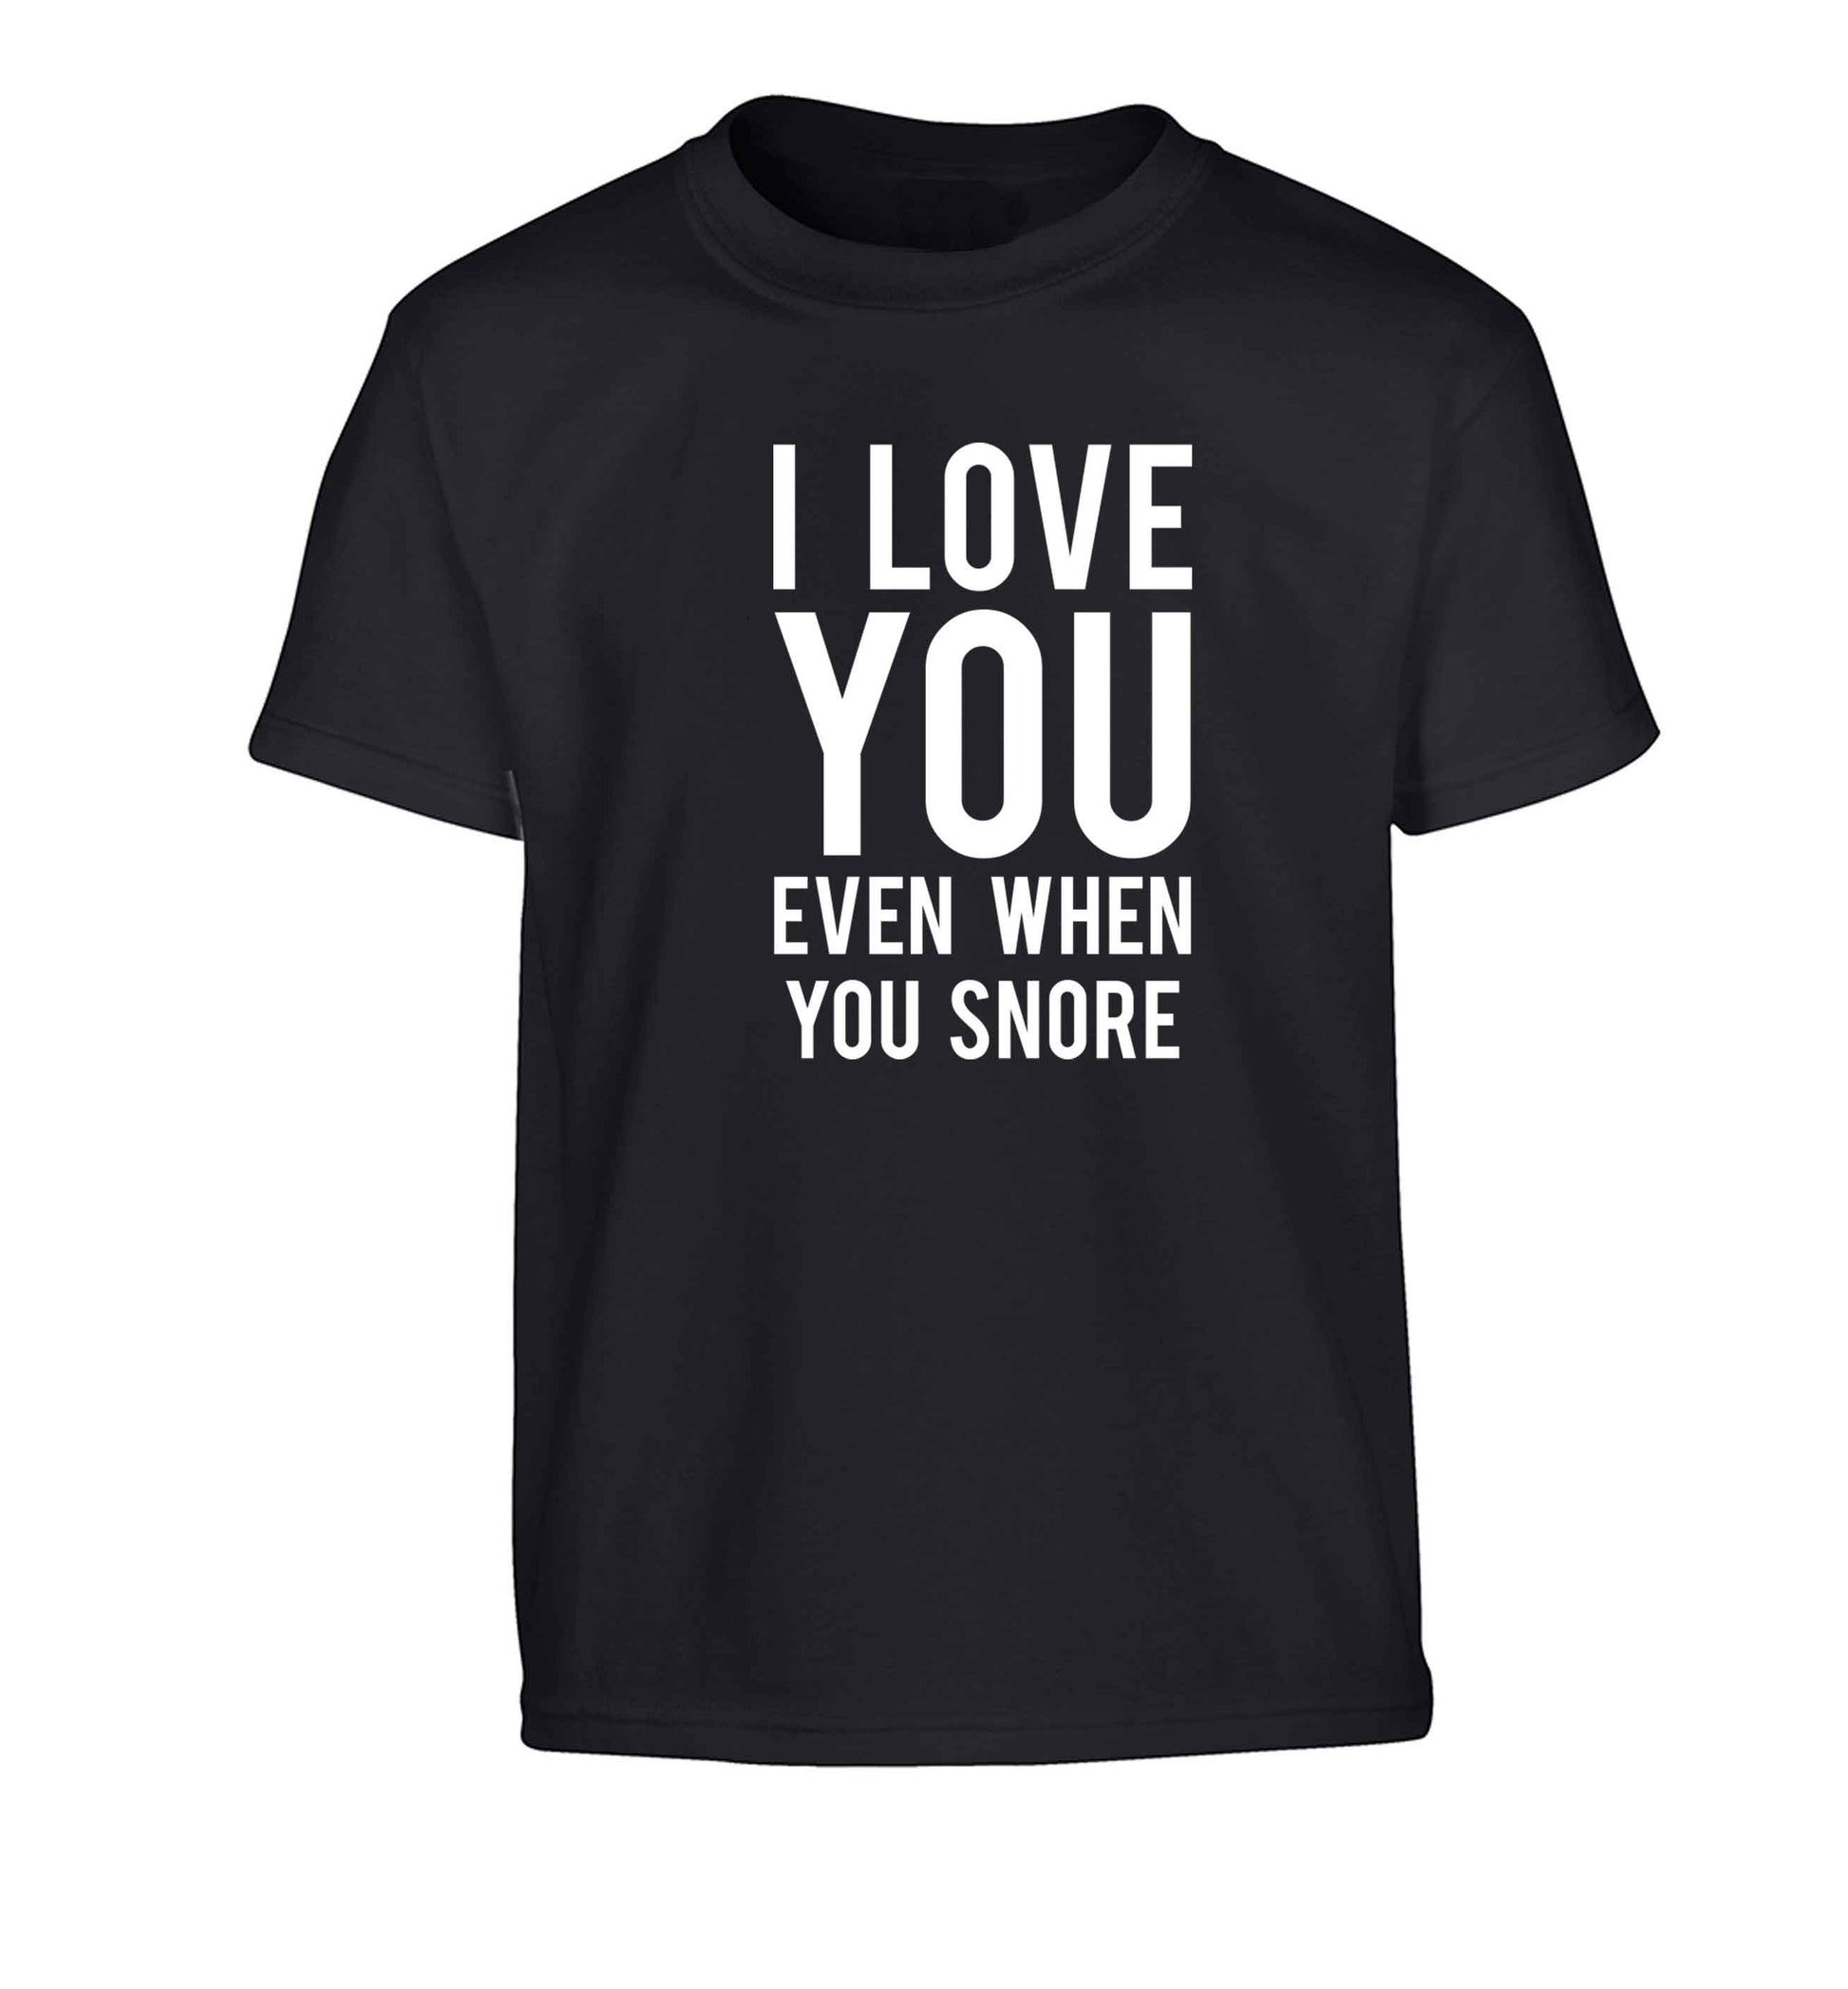 I love you even when you snore Children's black Tshirt 12-13 Years